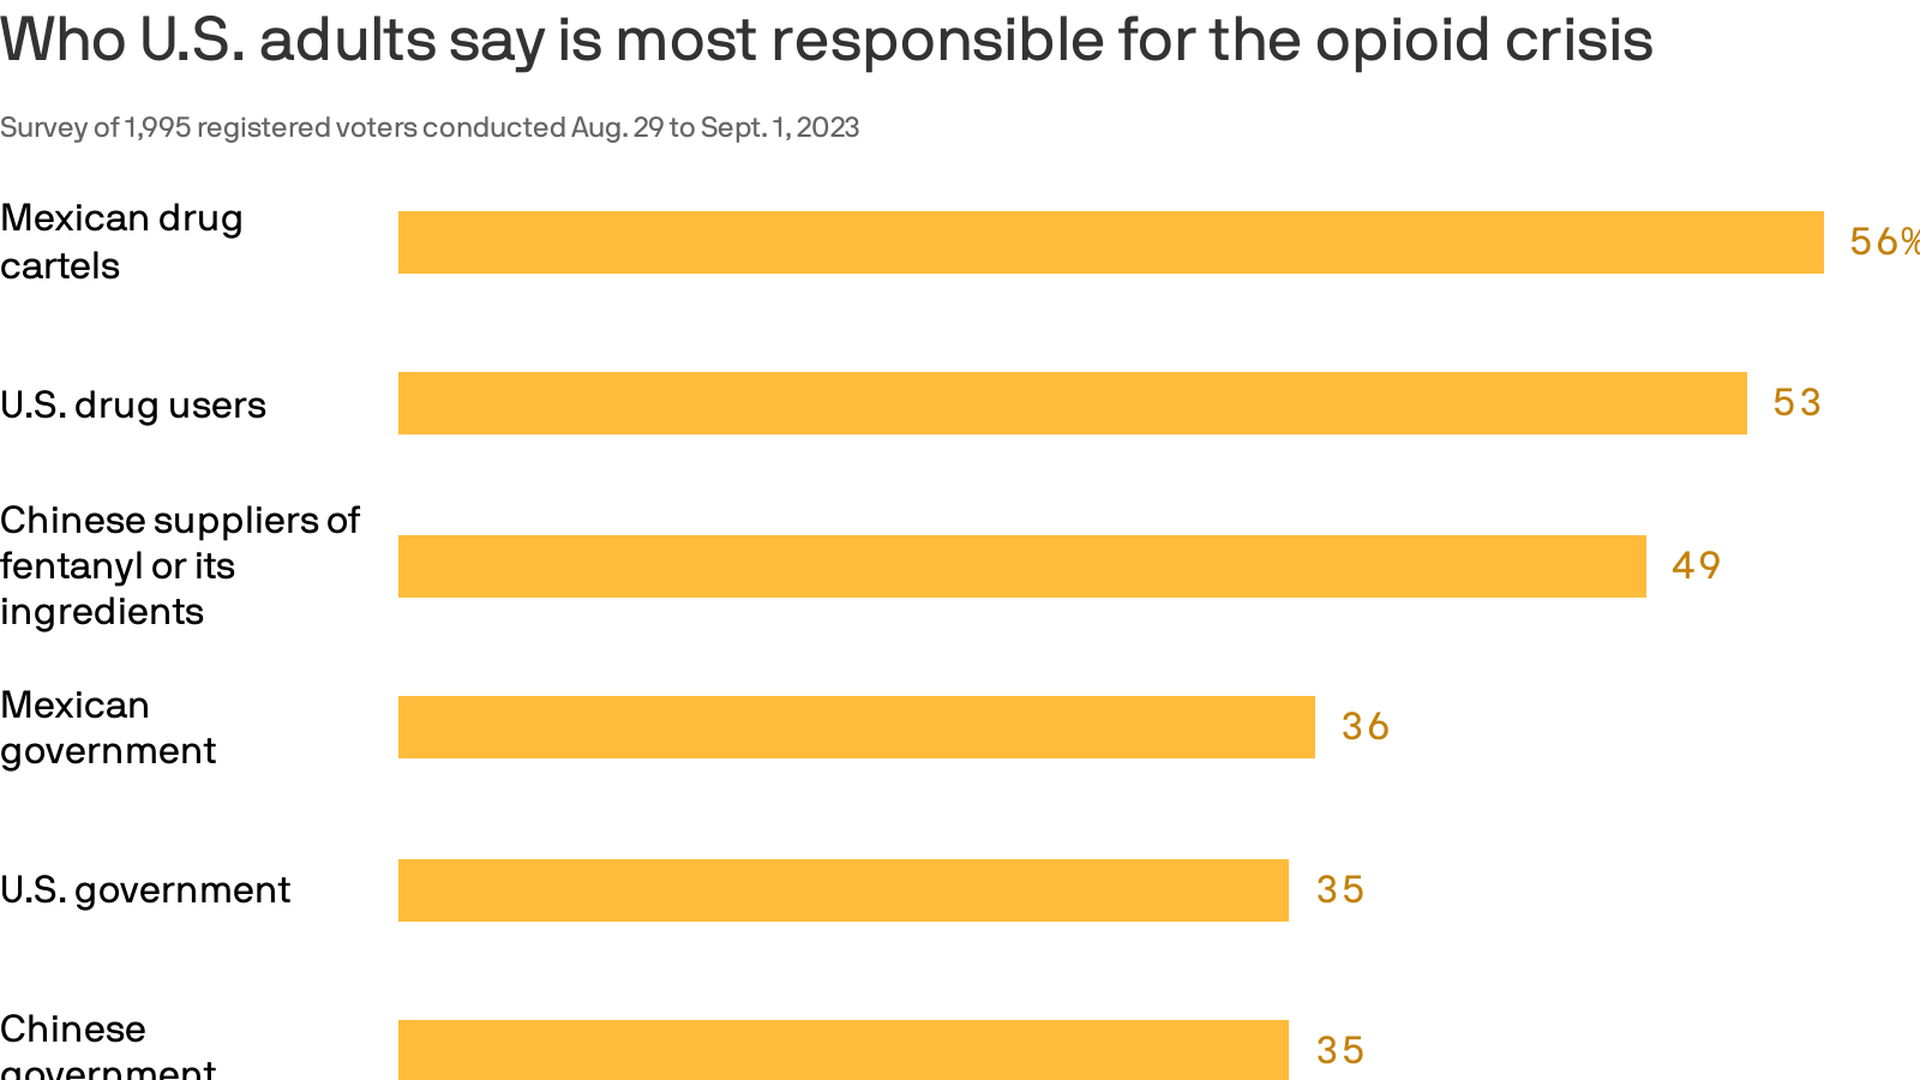 Bar chart showing who U.S. adults believe is most responsible for the opioid crisis. Mexican drug cartels, U.S. drug users and Chinese suppliers of fentanyl were the top three responses.